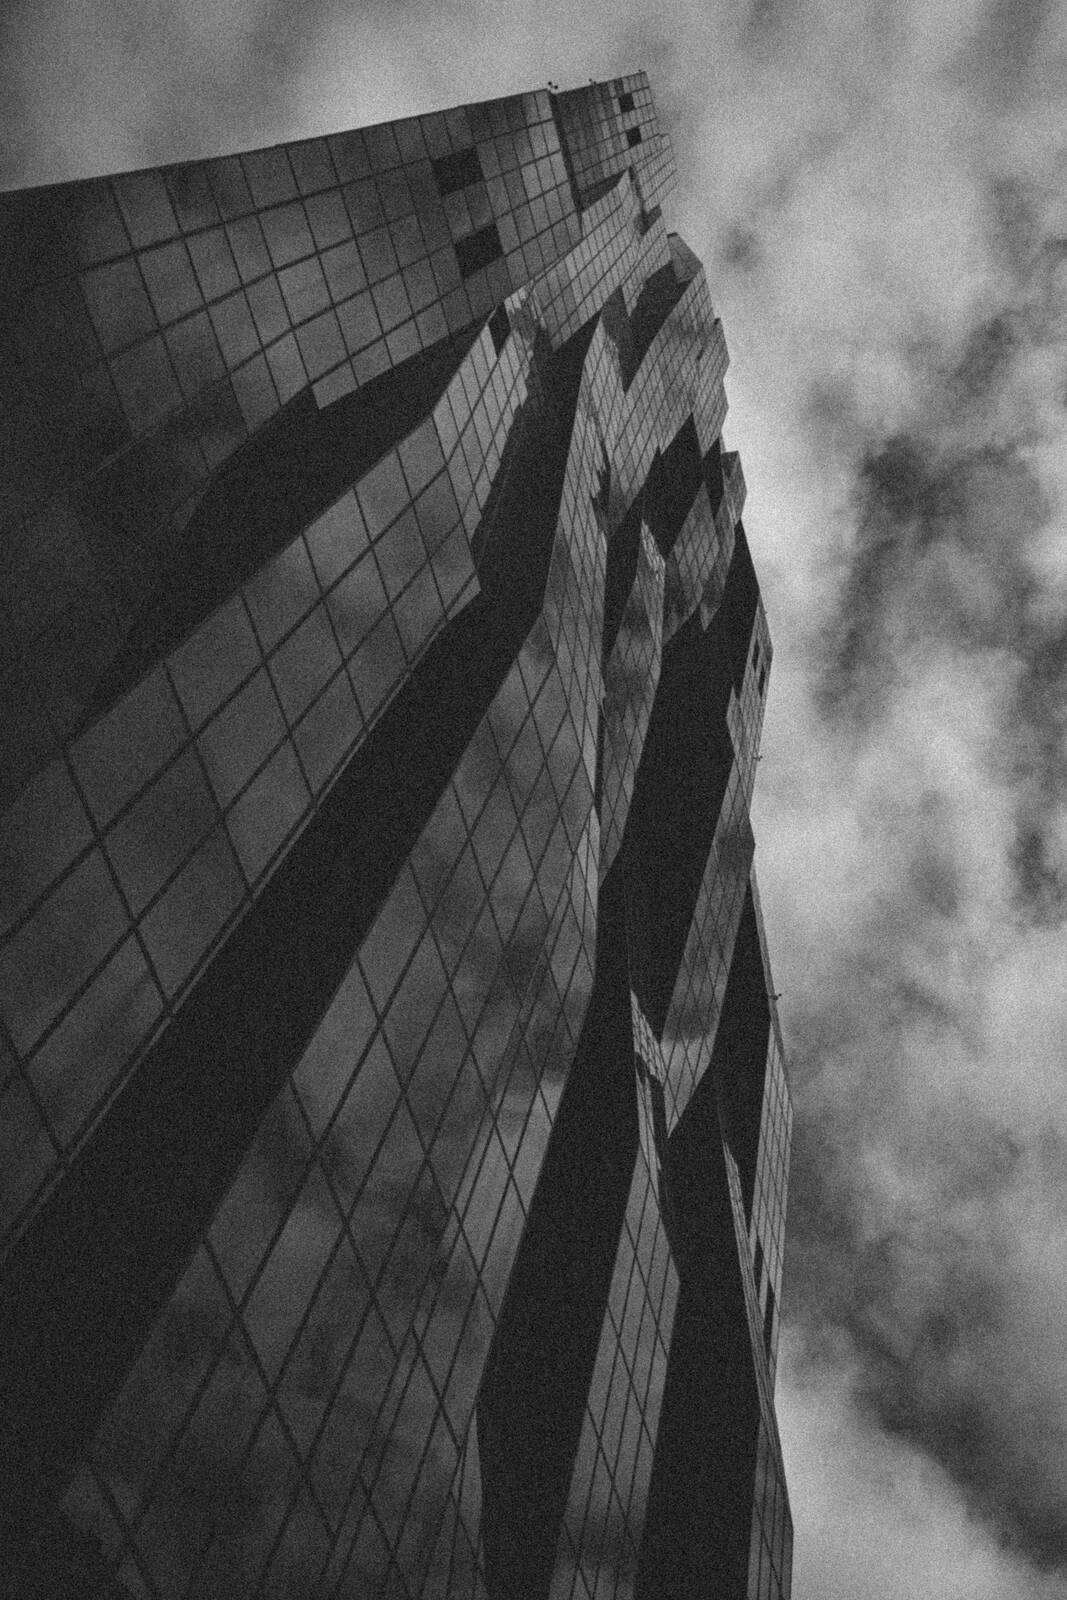 Image of DC Tower by Dan Rayner